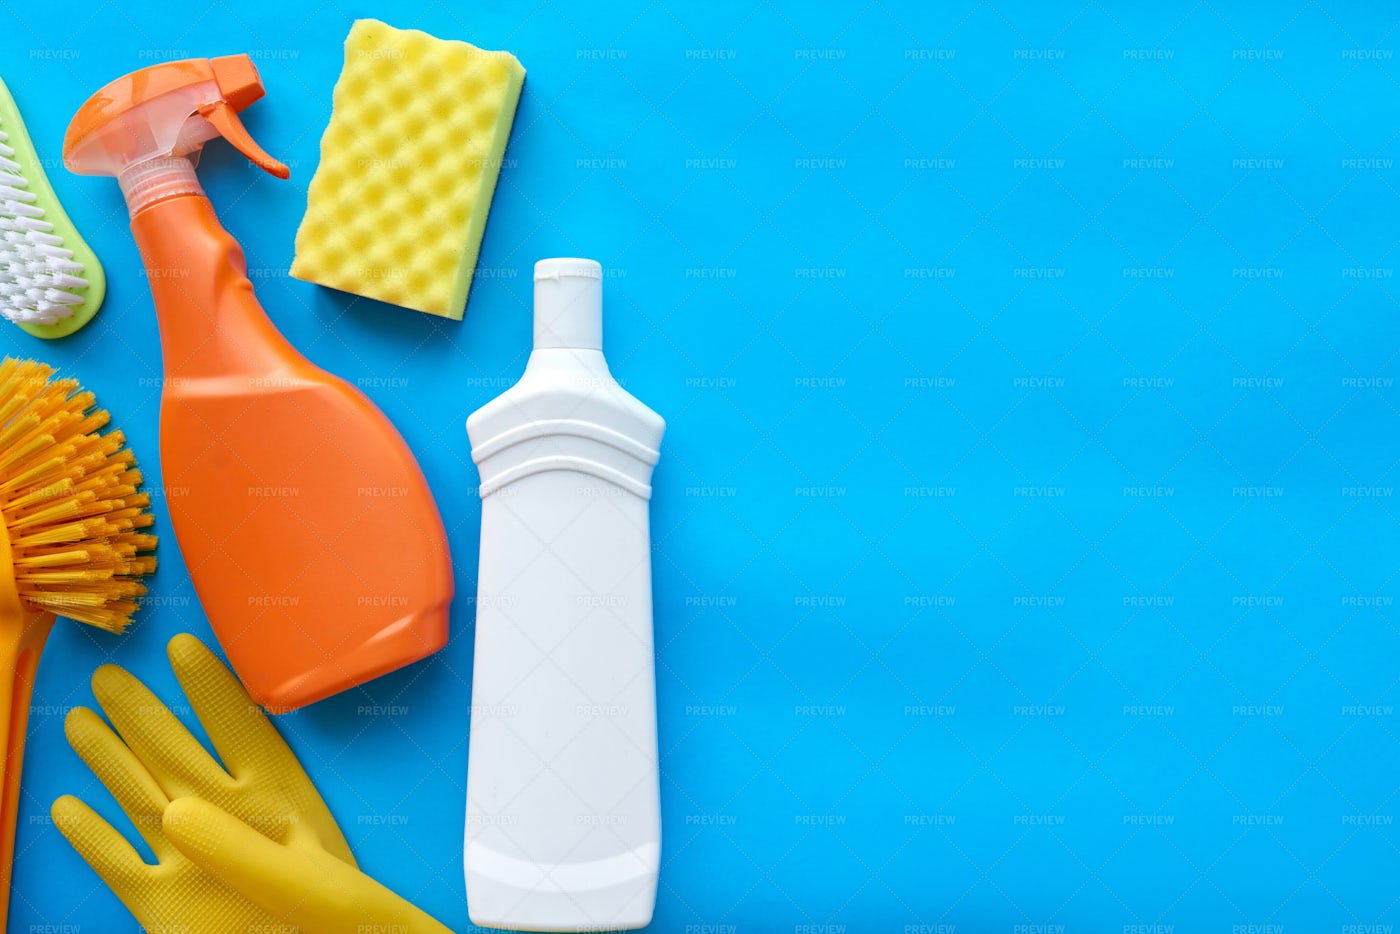 Cleaning Products: Stock Photos